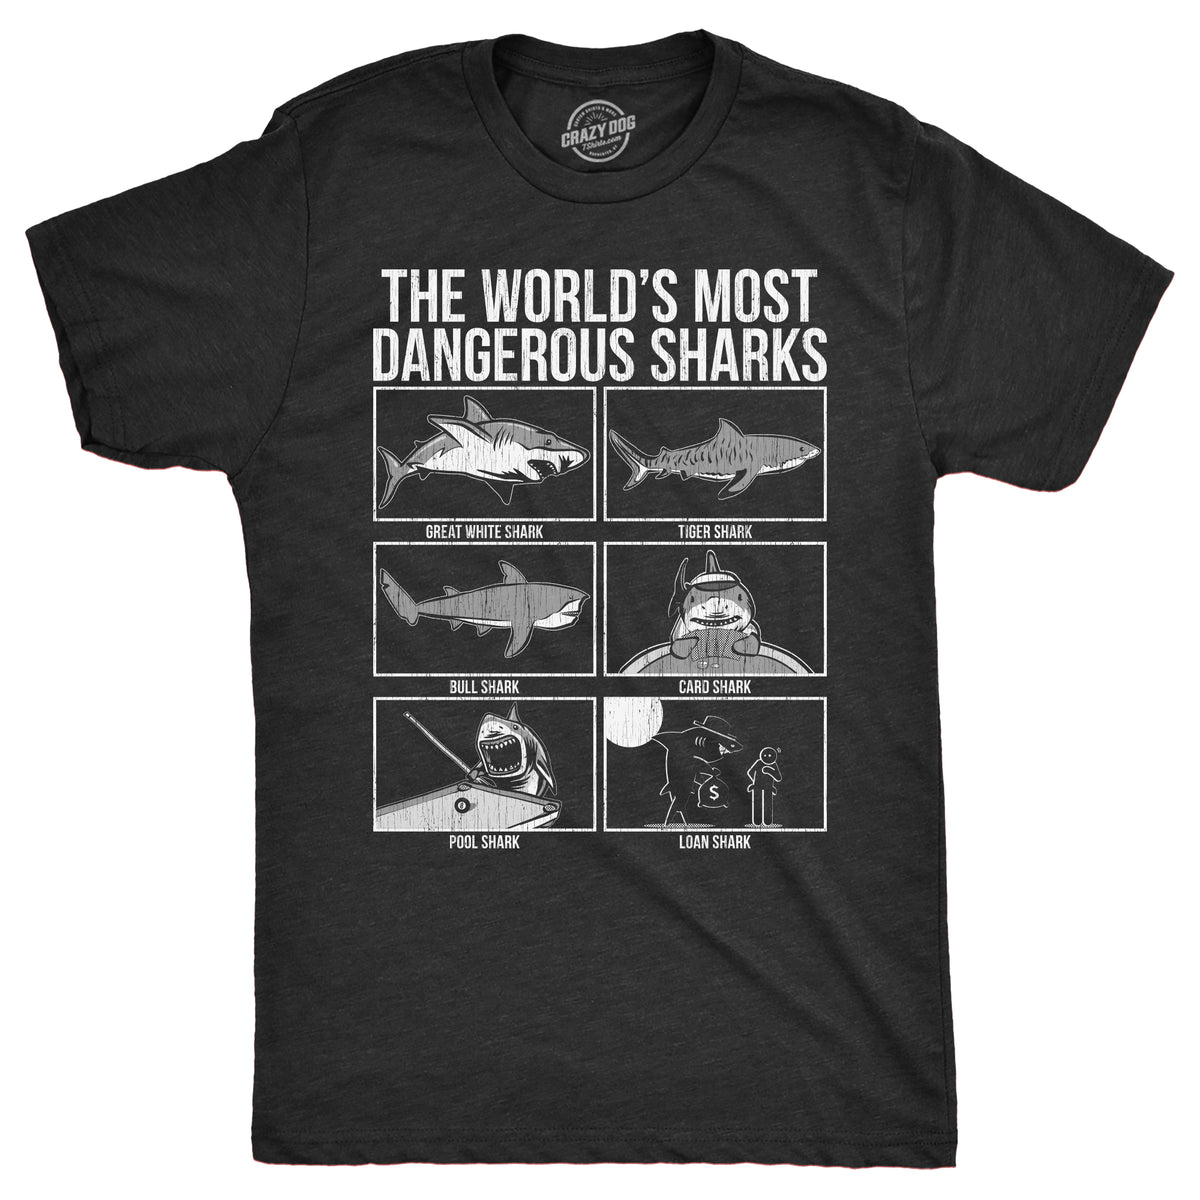 Funny Heather Black - SHARKS The Worlds Most Dangerous Sharks Mens T Shirt Nerdy Animal sarcastic Tee